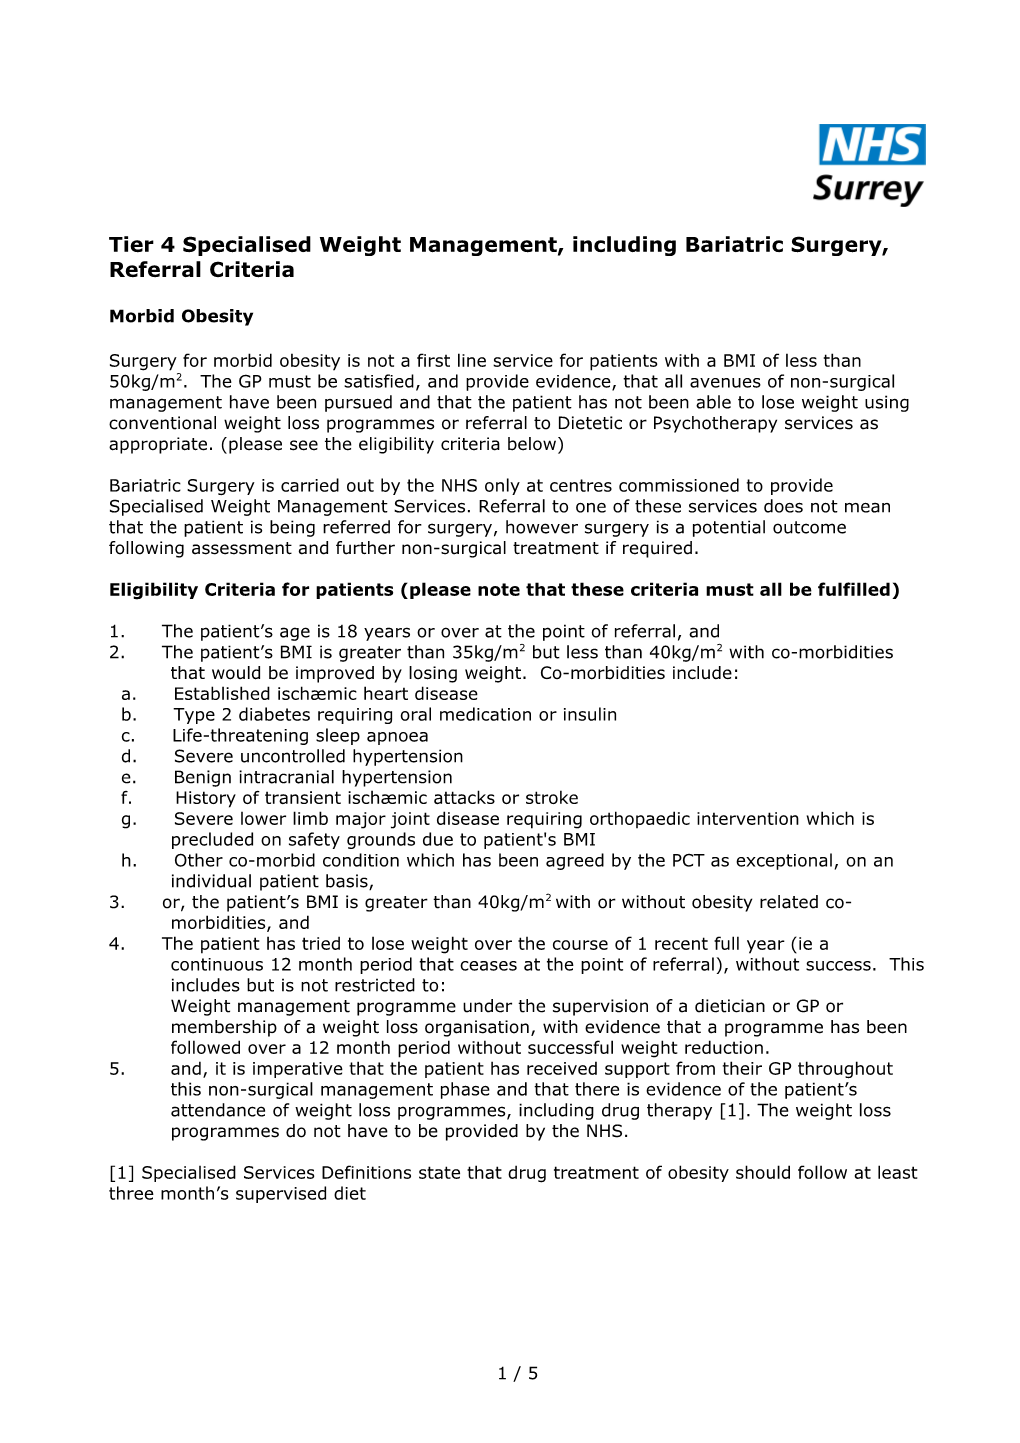 Tier 4 Specialised Weight Management, Including Bariatric Surgery, Referral Criteria